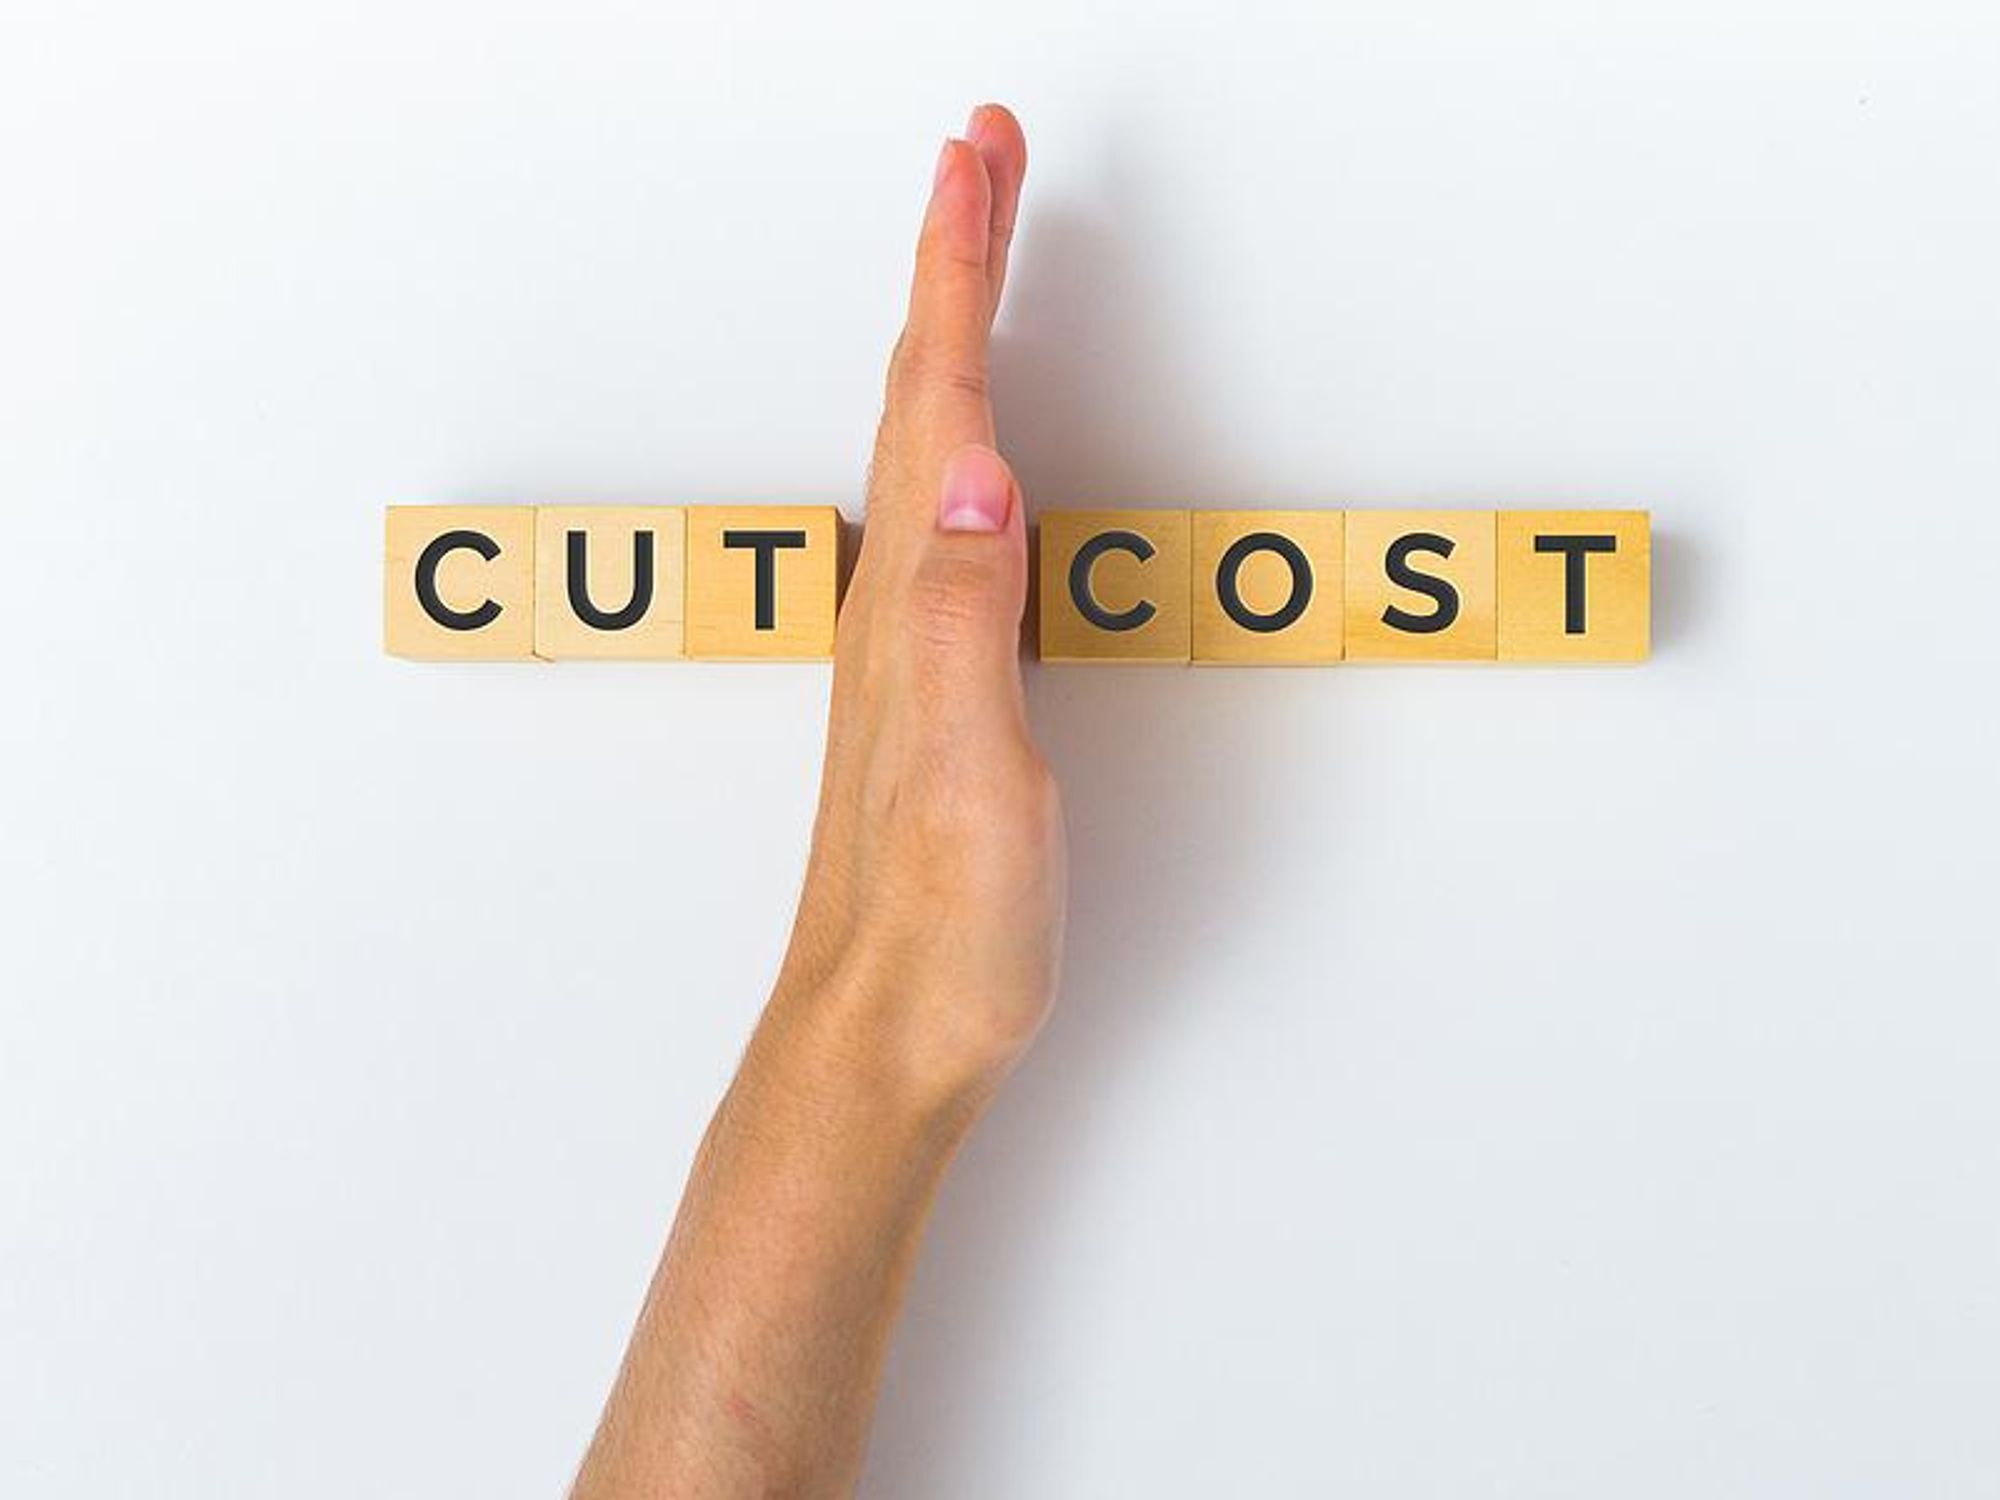 Cut costs, cost-cutting concept 